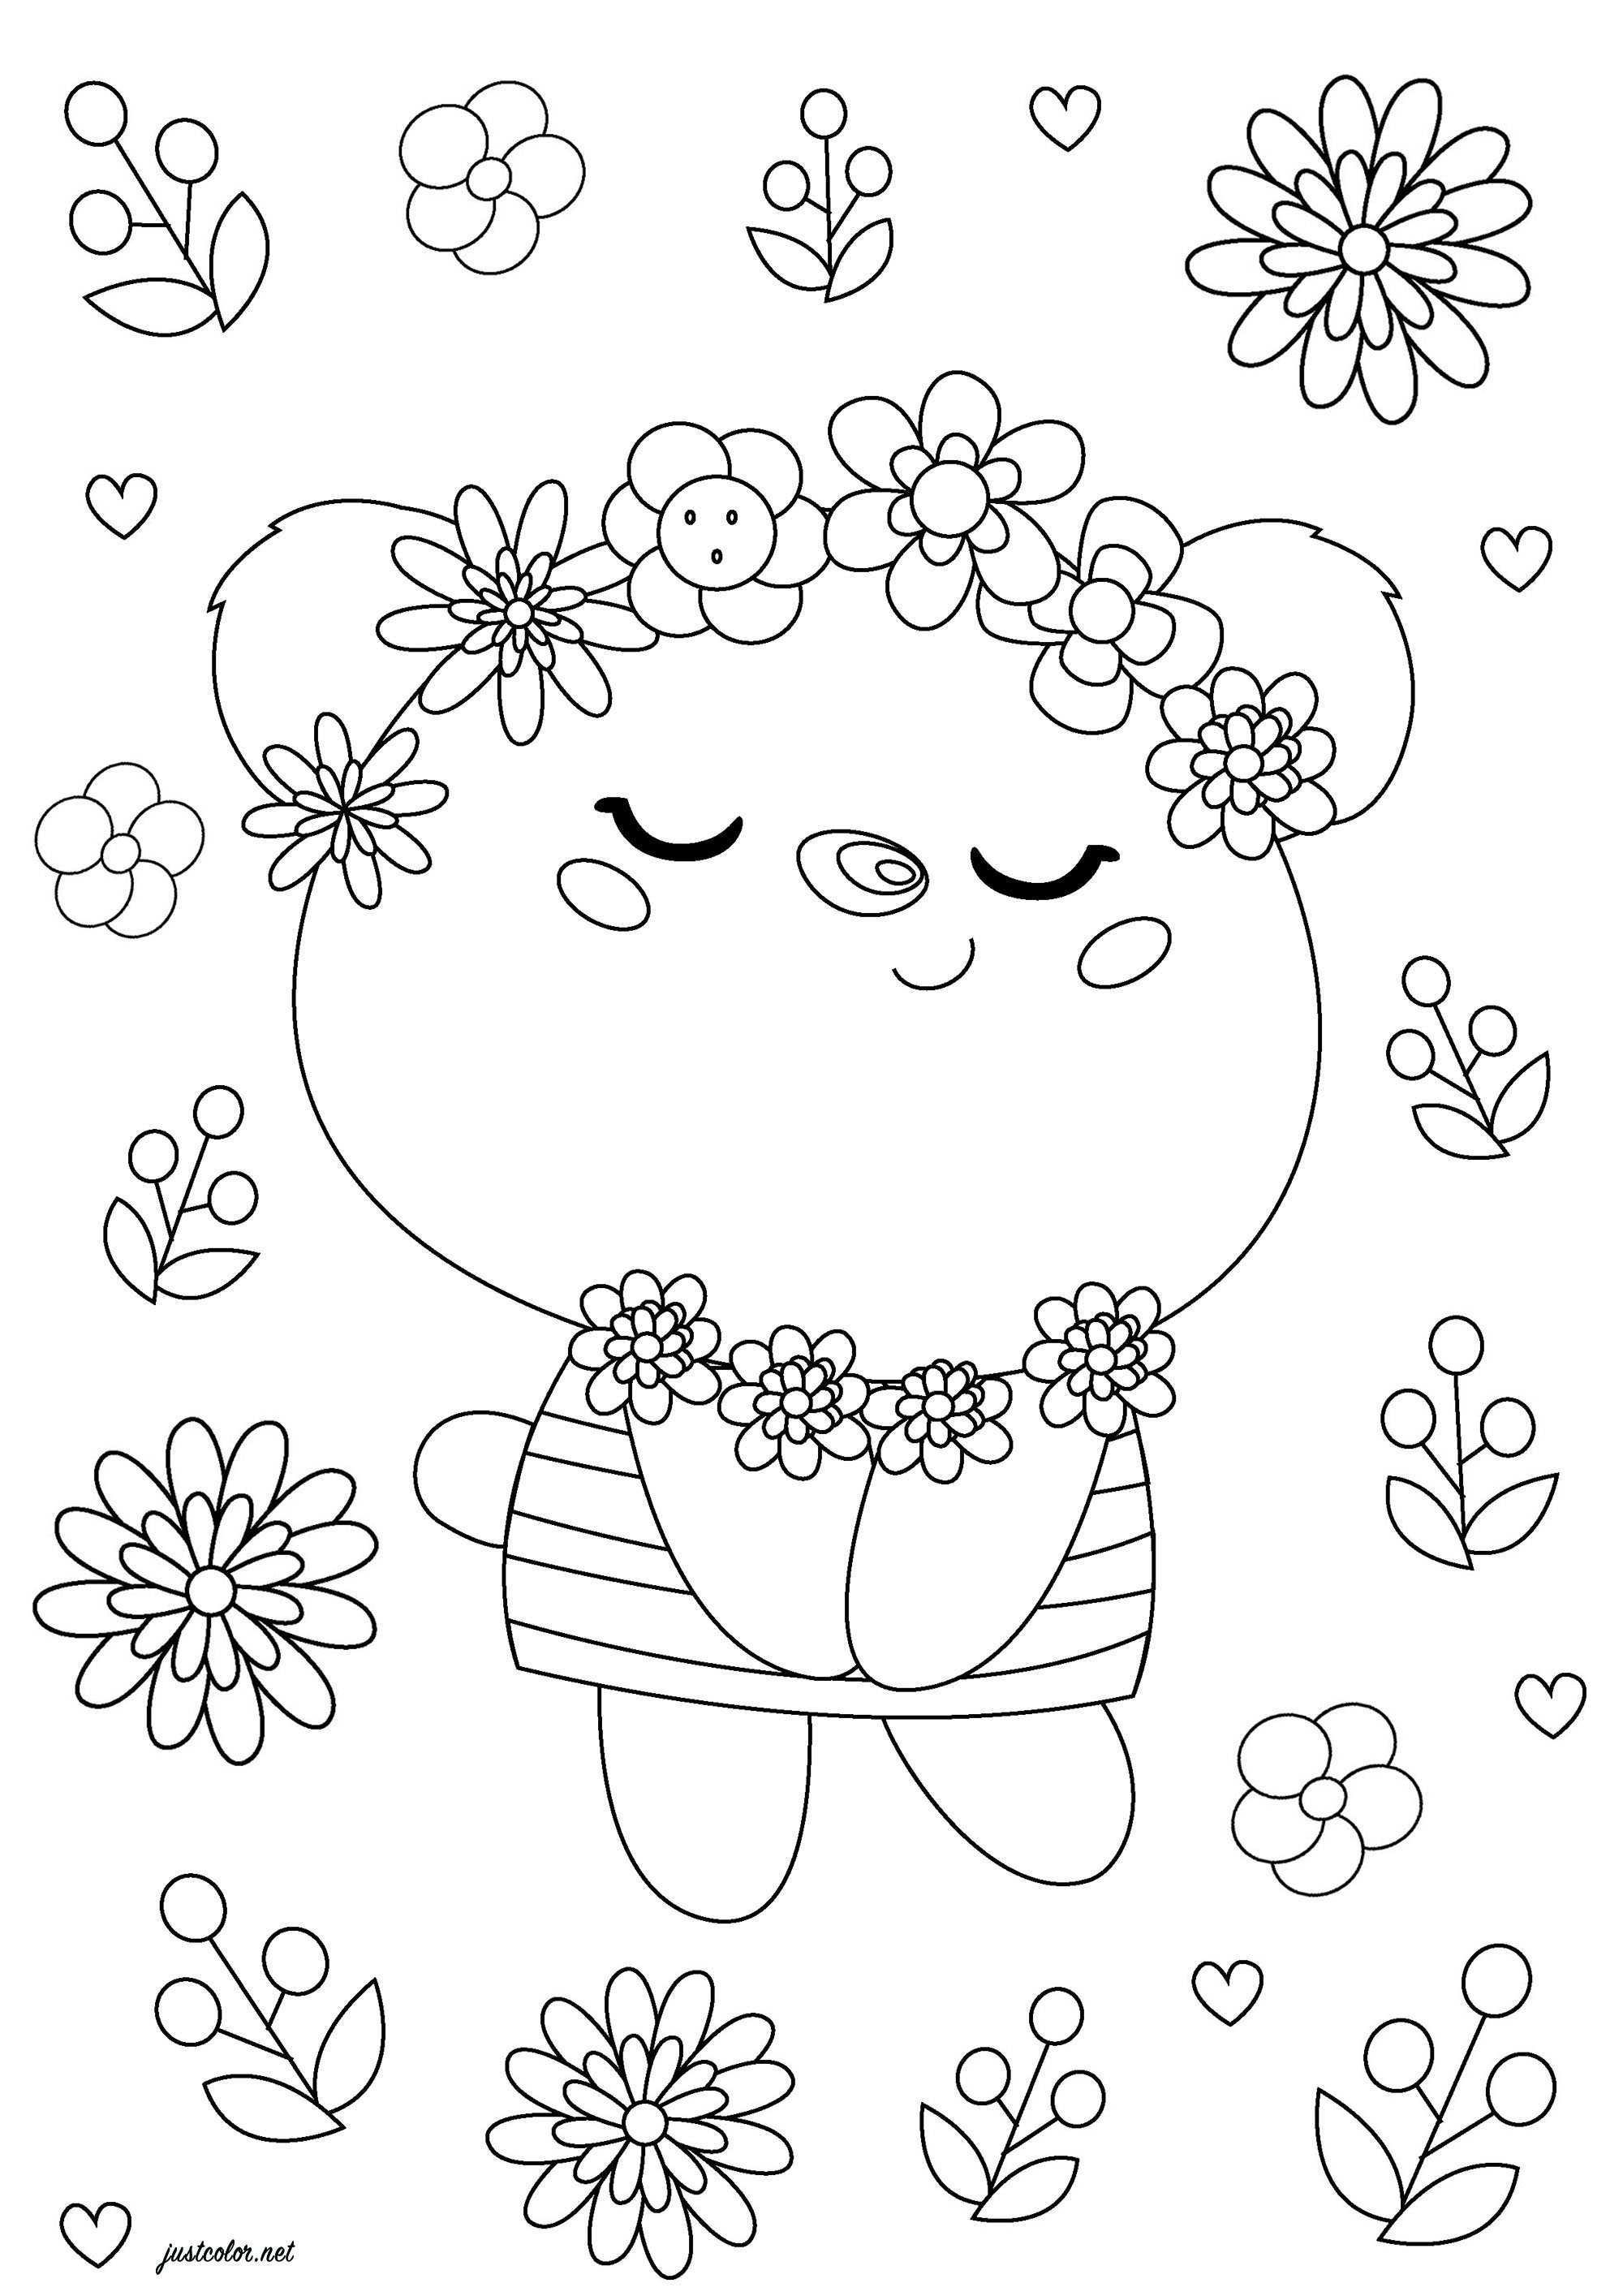 A pretty little shy bear. It is surrounded by flowers, it misses only some colors...